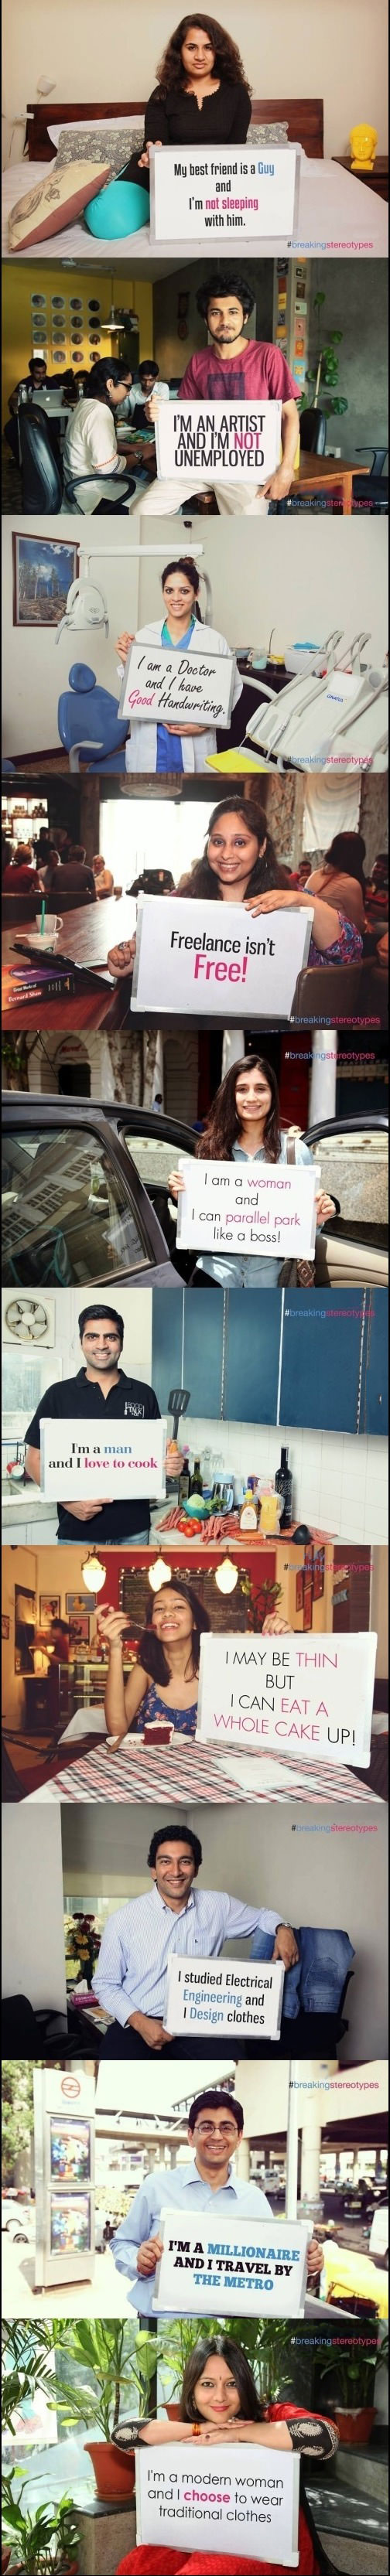 knocking down stereotypes, freelance isn't free, i am a woman and i parallel park like a boss